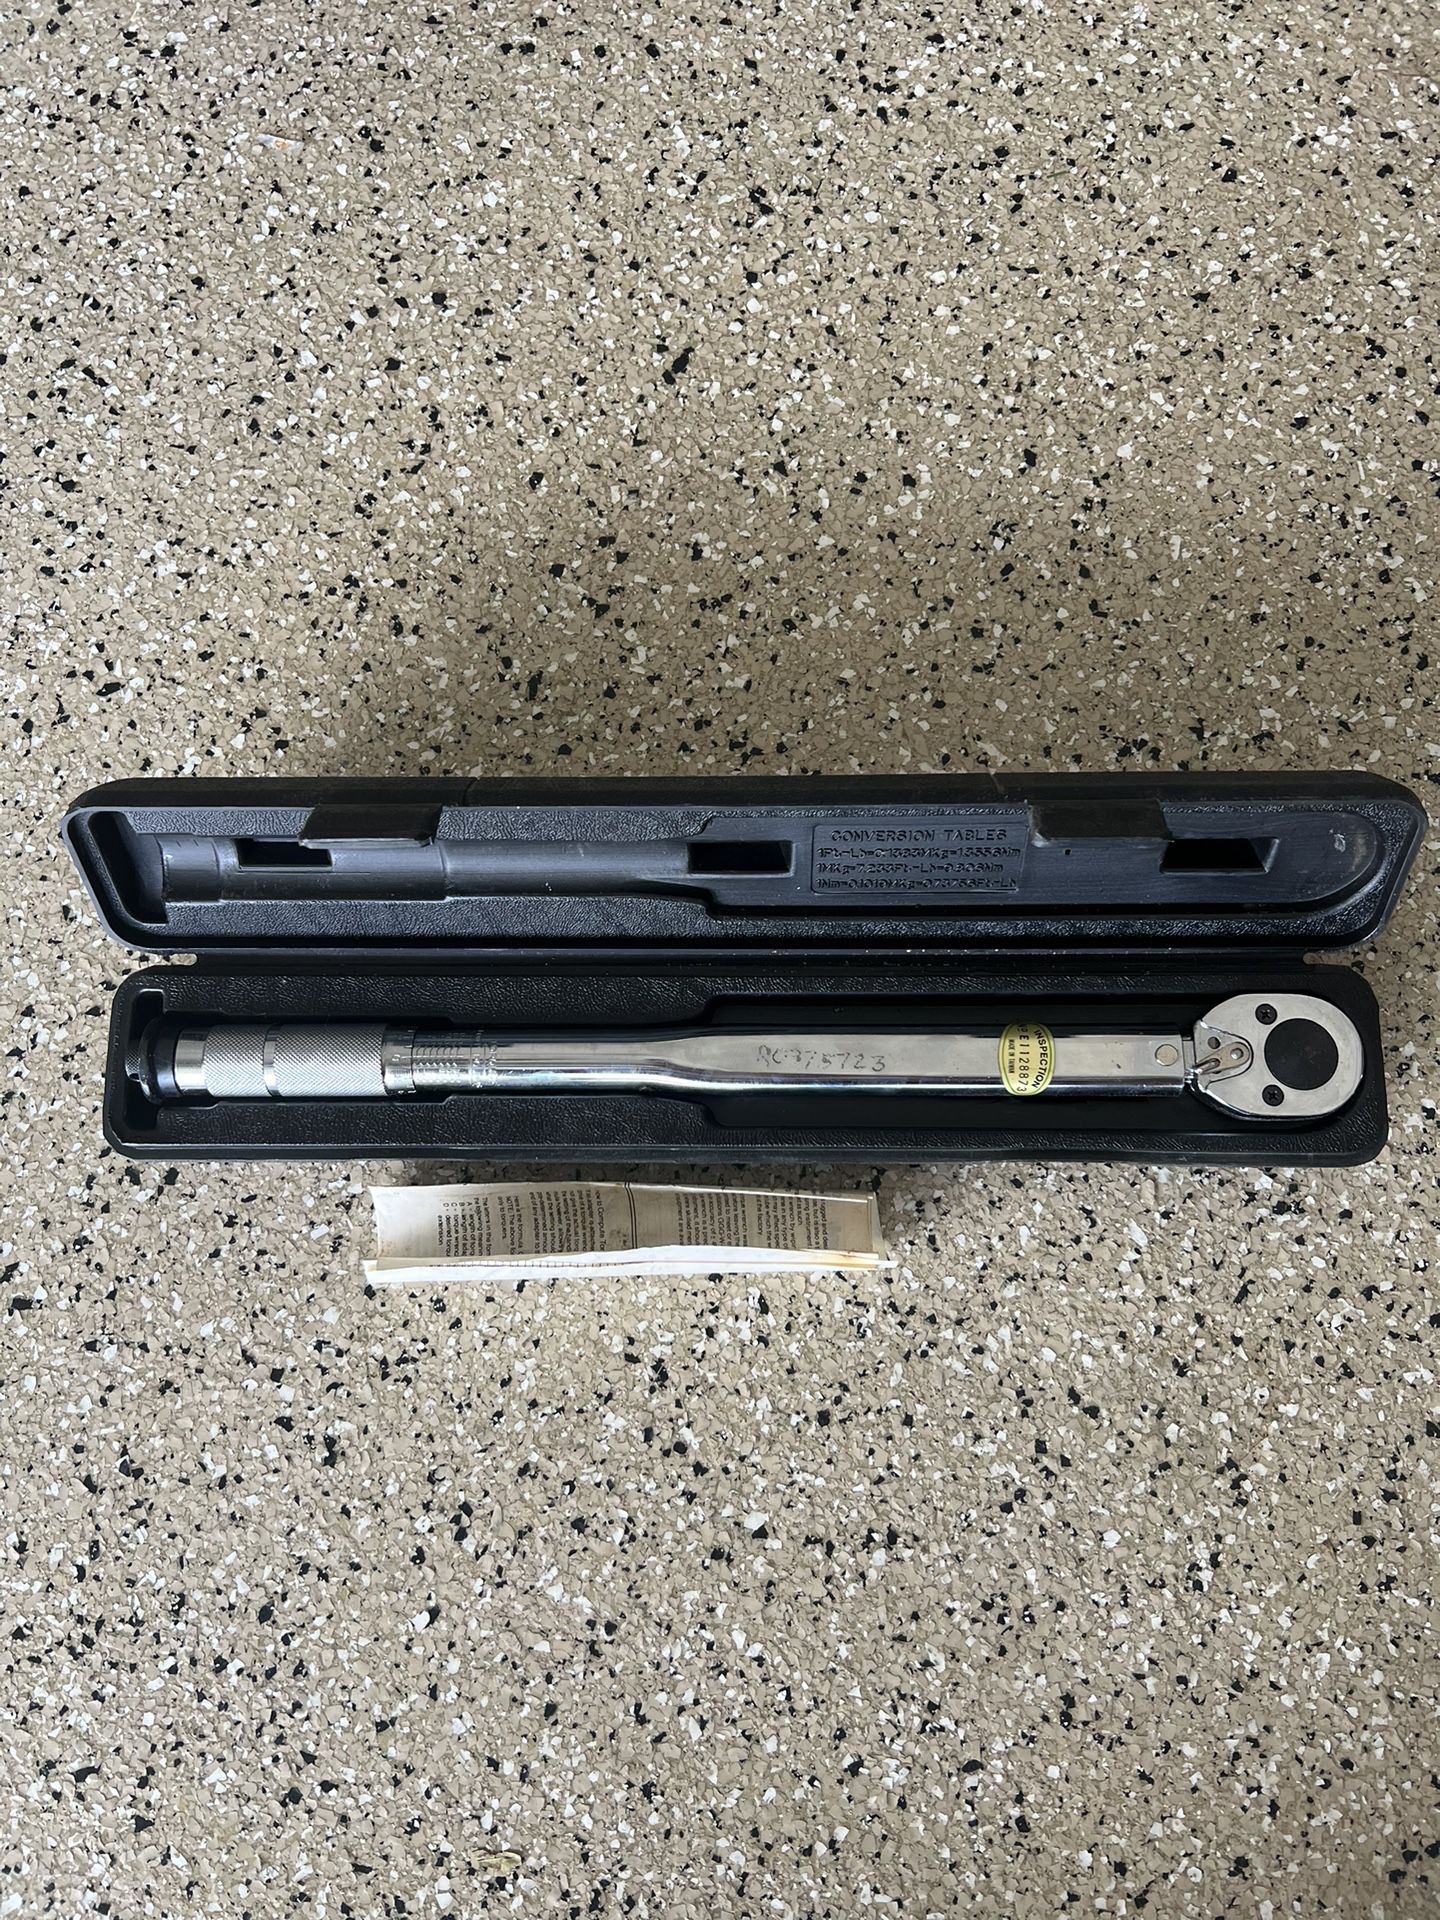 Allied Dual Torque Wrench